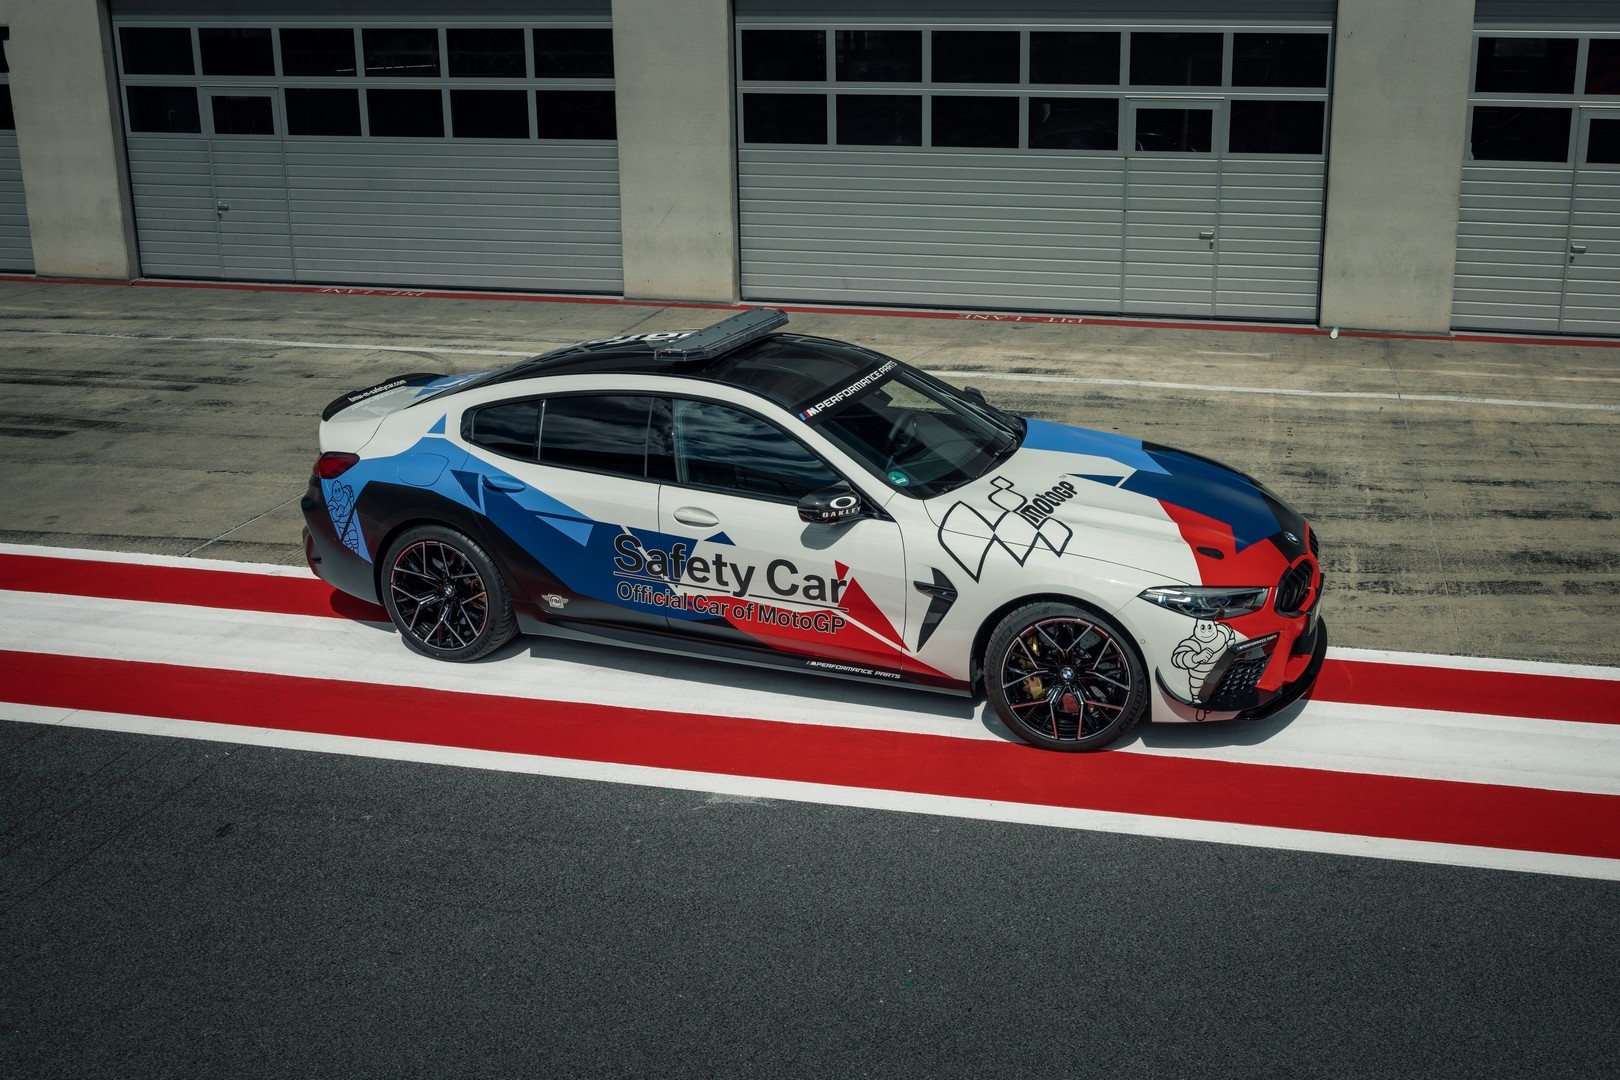 2019 - [BMW] Série 8 Gran Coupé [G16] - Page 7 Bmw-surprisingly-turned-the-new-m8-gran-coupe-into-a-safety-car-for-motogp_3